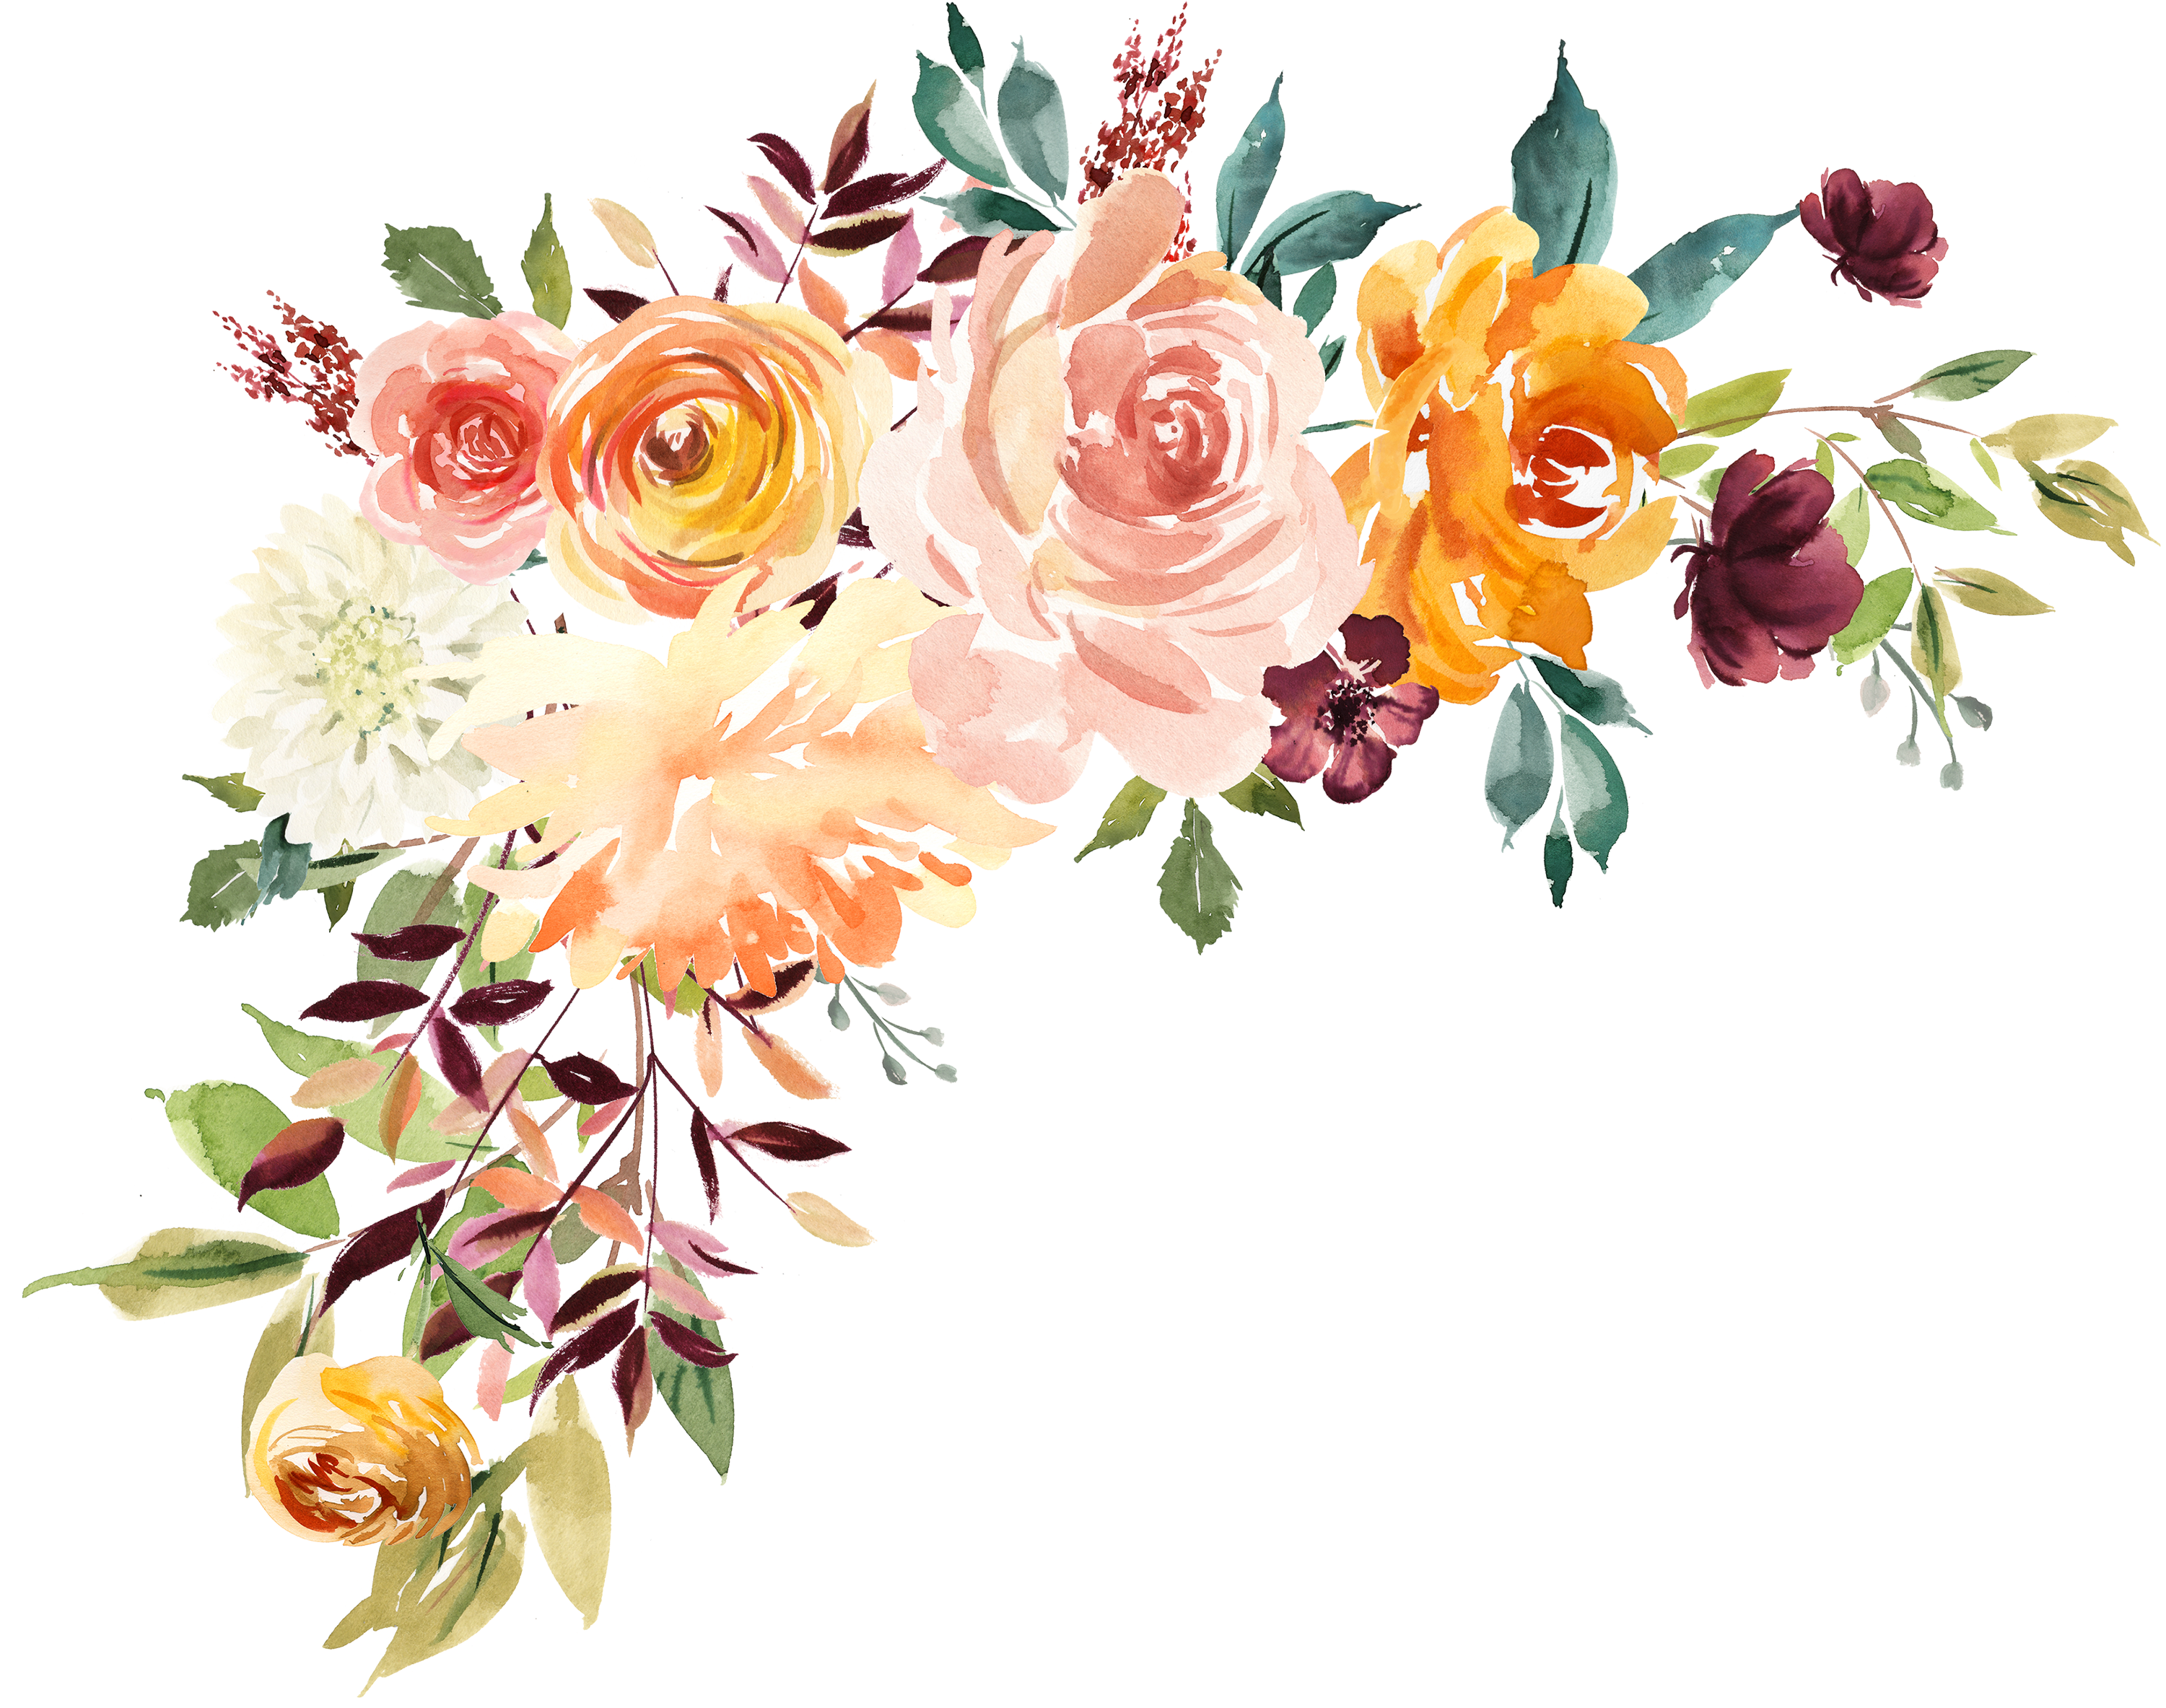 301-3014865_watercolor-flower-background-free-watercolor-flowers-floral-border.png